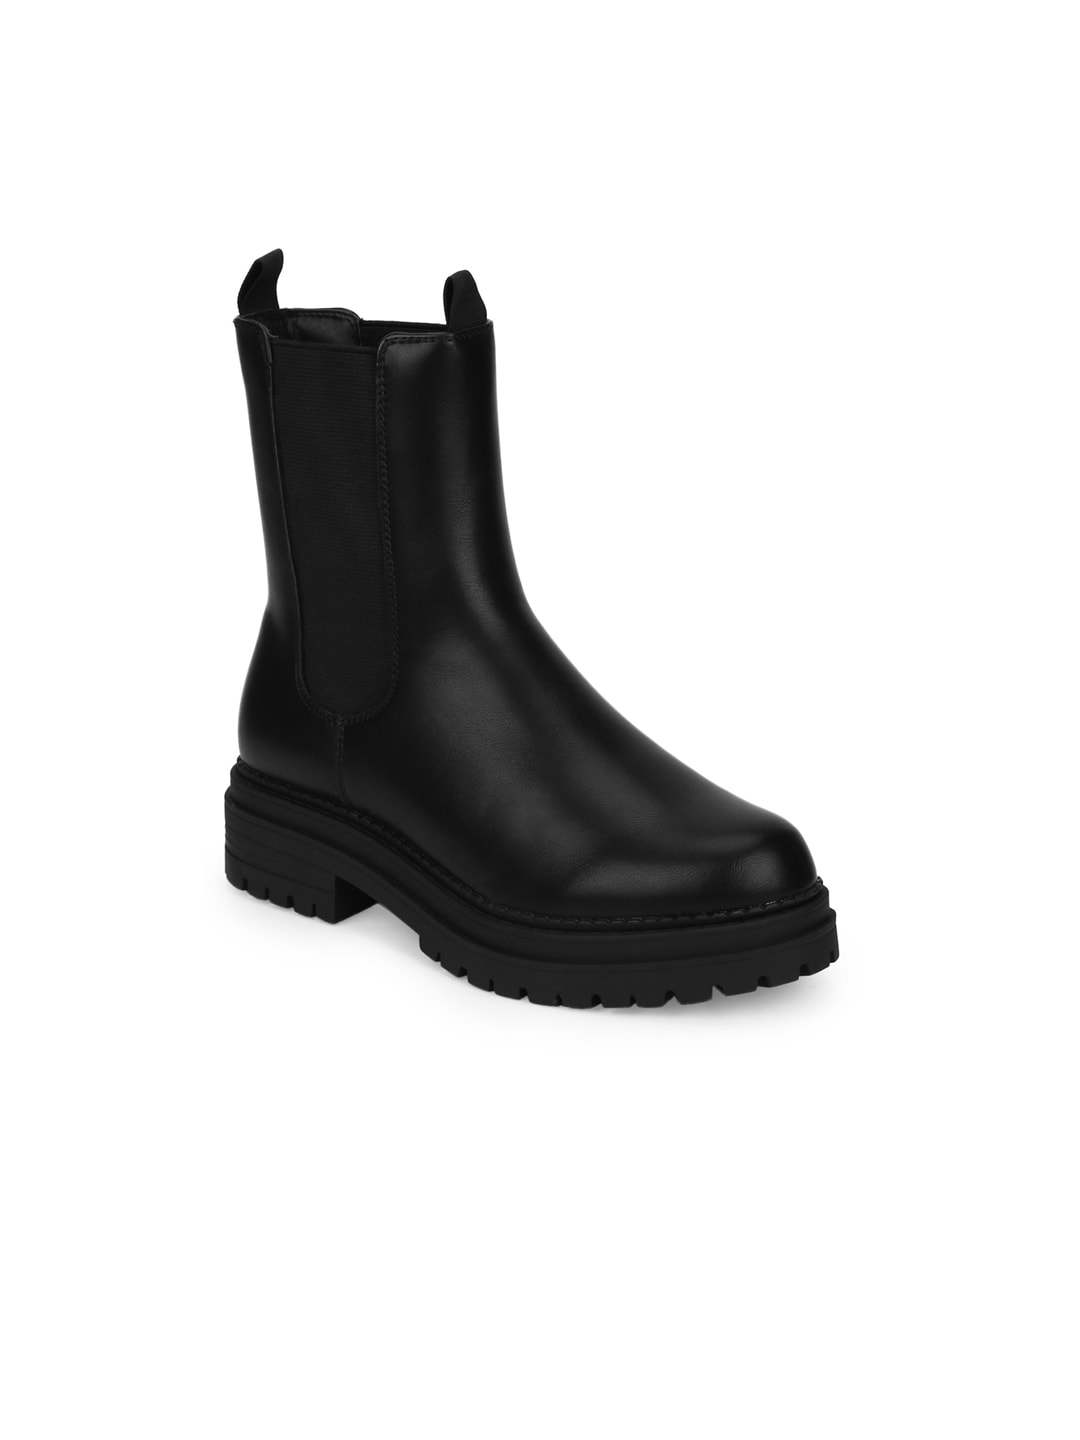 Truffle Collection Black Solid High-Top Block Heeled Boots Price in India